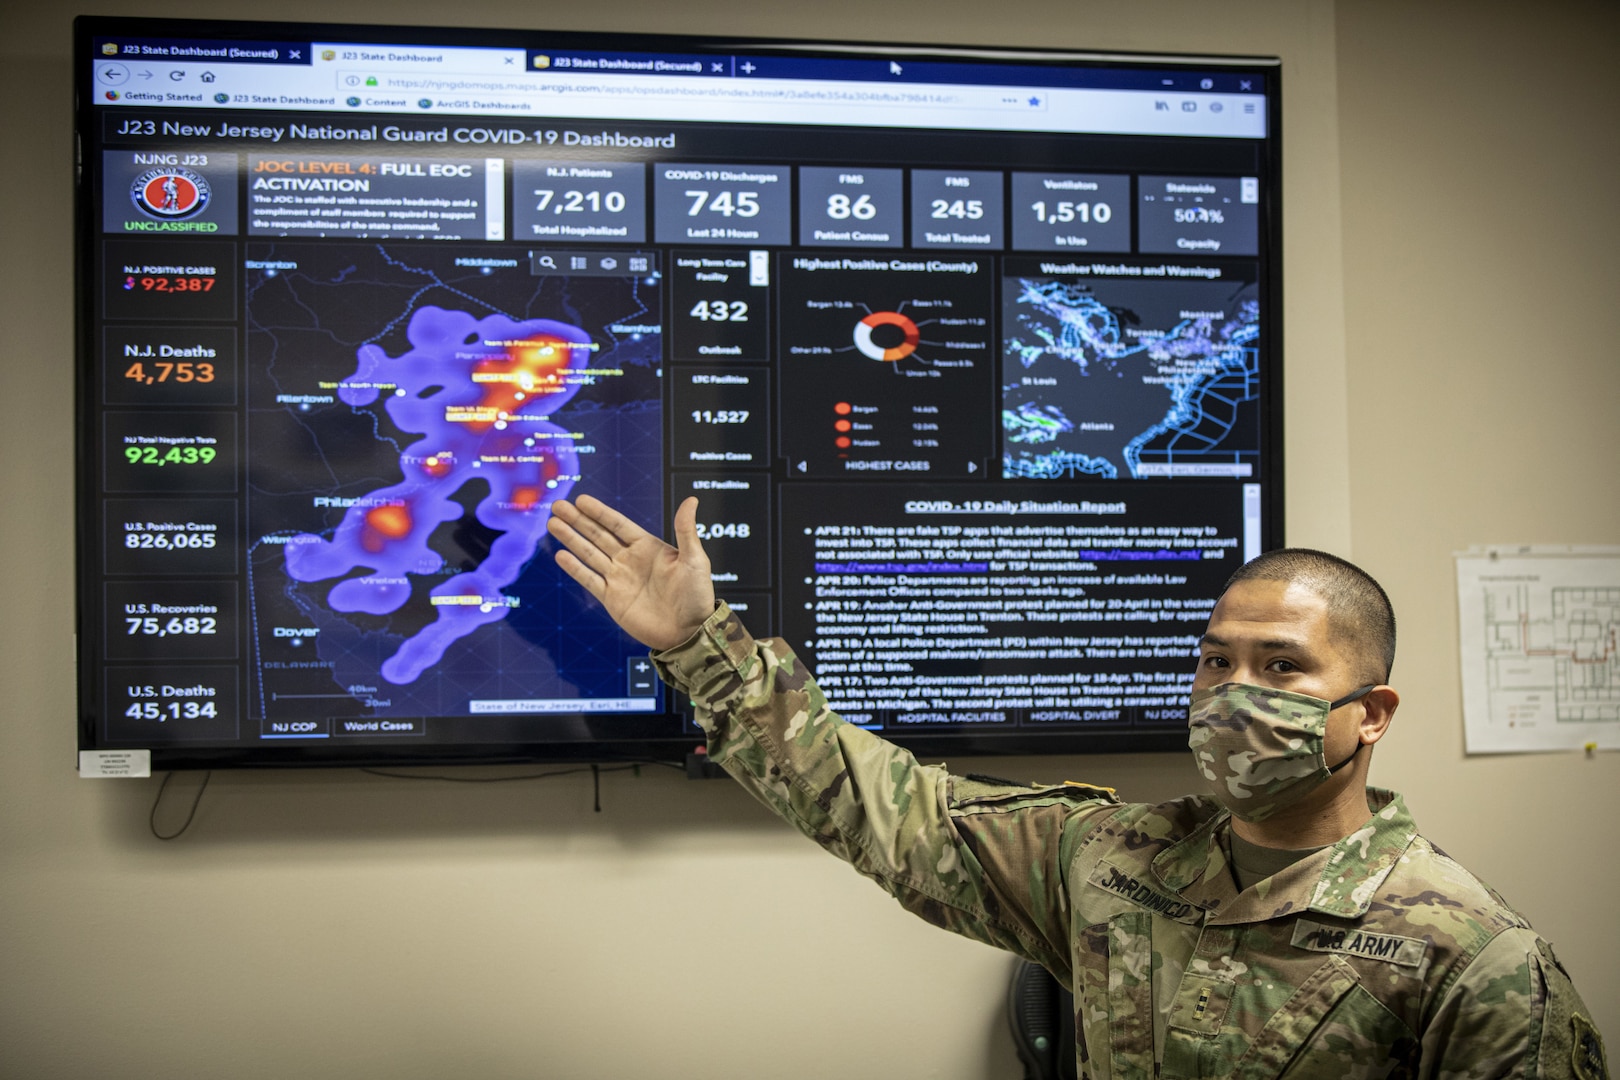 U.S. Army Chief Warrant Officer 2 Timothy Jardinico works in the New Jersey National Guard’s Joint Operations Center in the Homeland Security Center of Excellence, Lawrenceville, N.J., April 22, 2020. New Jersey Soldiers and Airmen, as well as active duty Air Force and Coast Guard members and civilians from U.S. Northern Command are working together in the center to support the state’s response efforts to COVID-19.